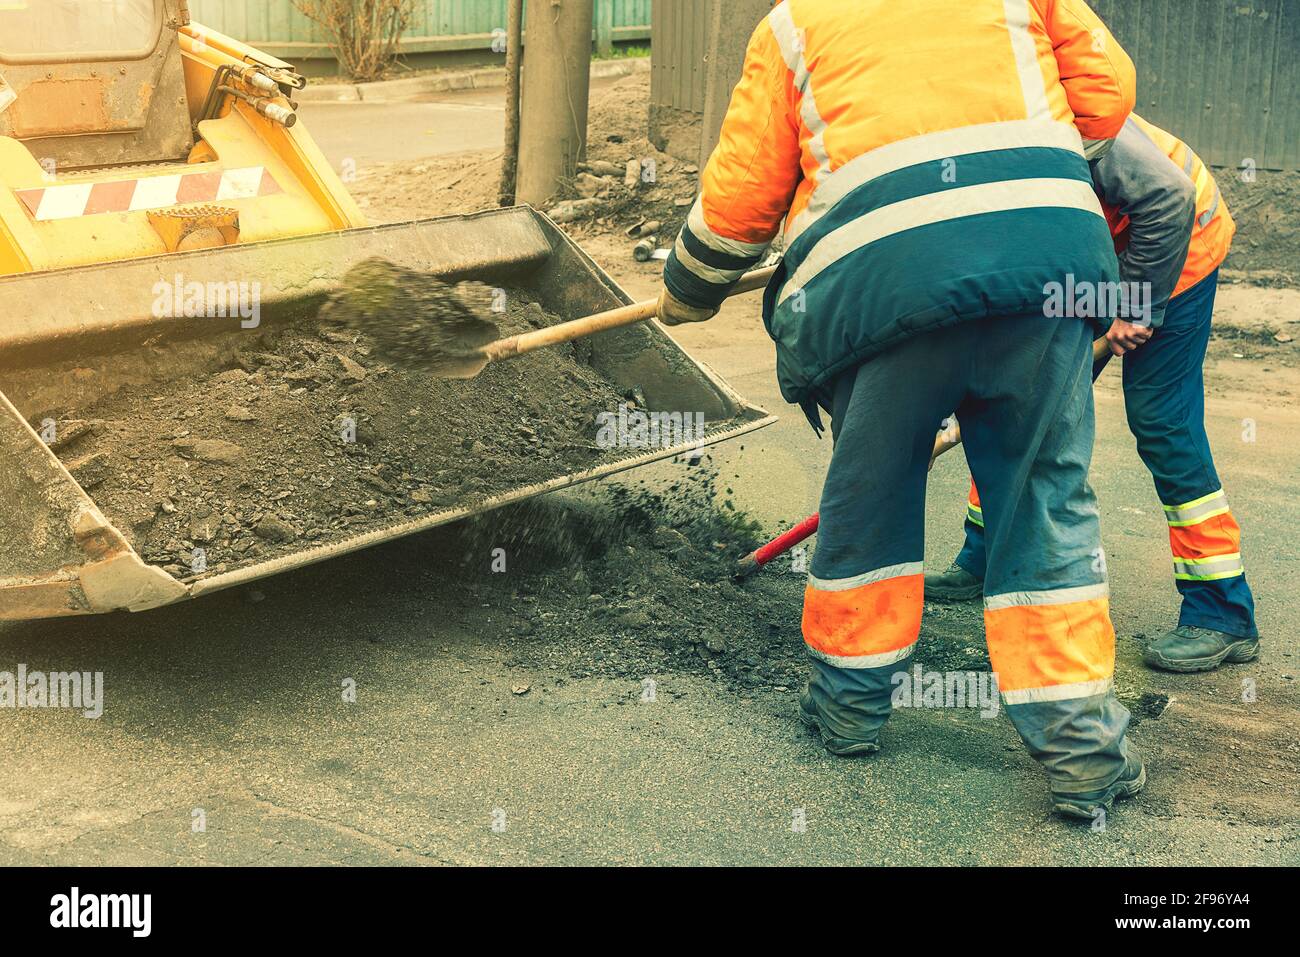 Road workers in bright orange reflective uniforms use shovels to scrape accumulated sand. maintenance of road and highway pavements. pothole repairing Stock Photo